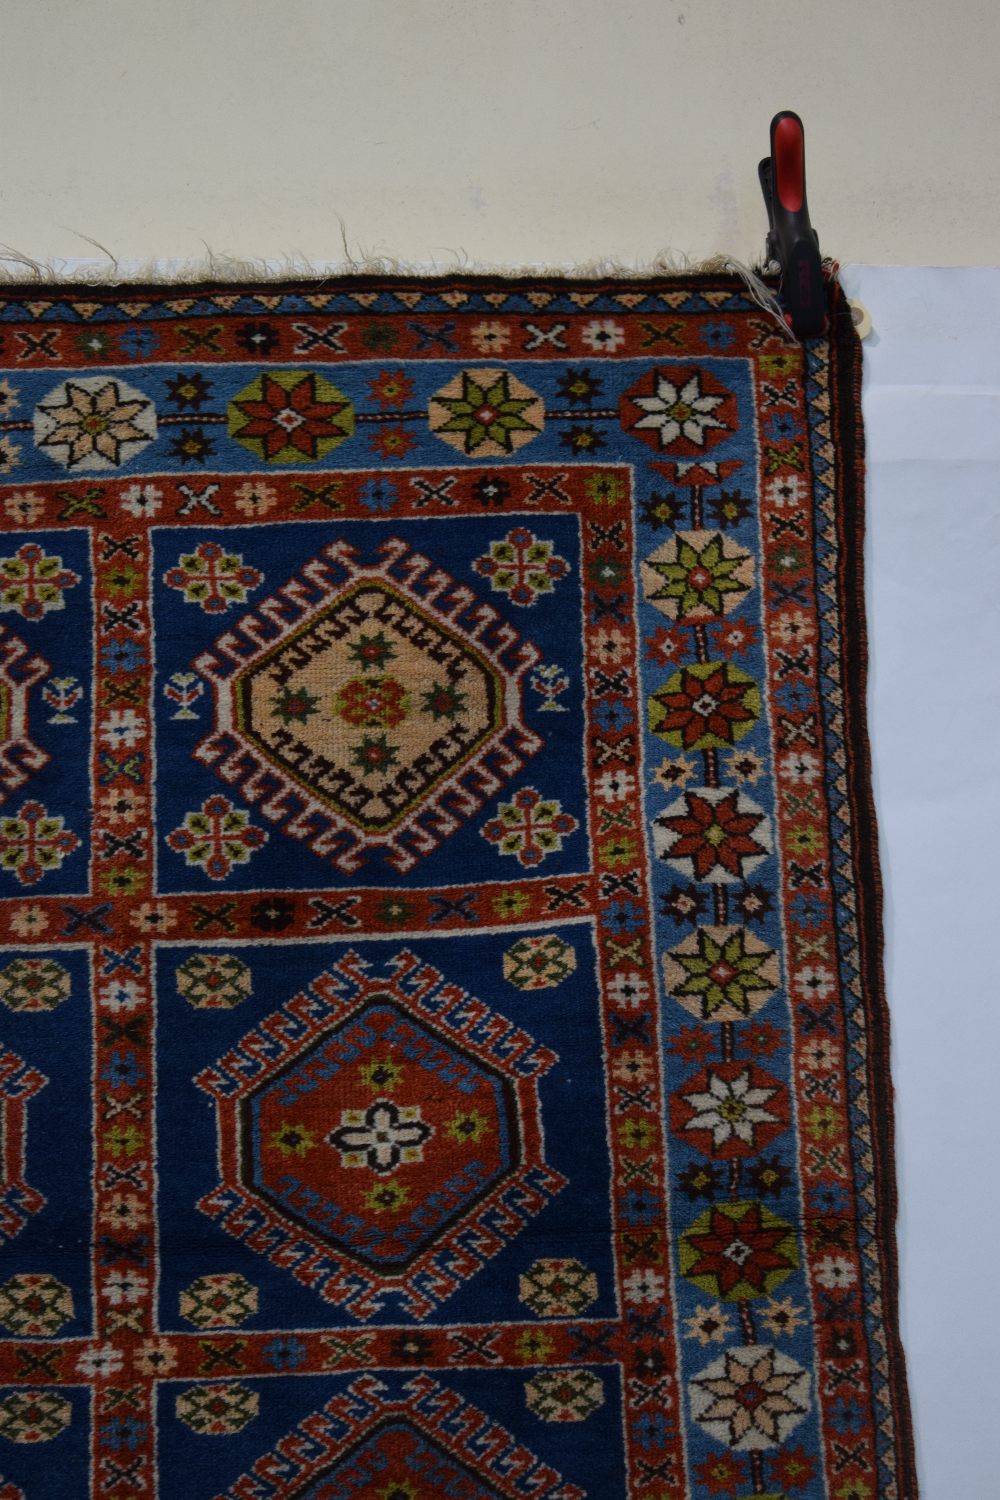 Yalameh compartment rug, south west Persia, circa 1930s; 4ft. 10in. x 3ft. 6in. 1.47m. x 1.07m. - Image 3 of 8